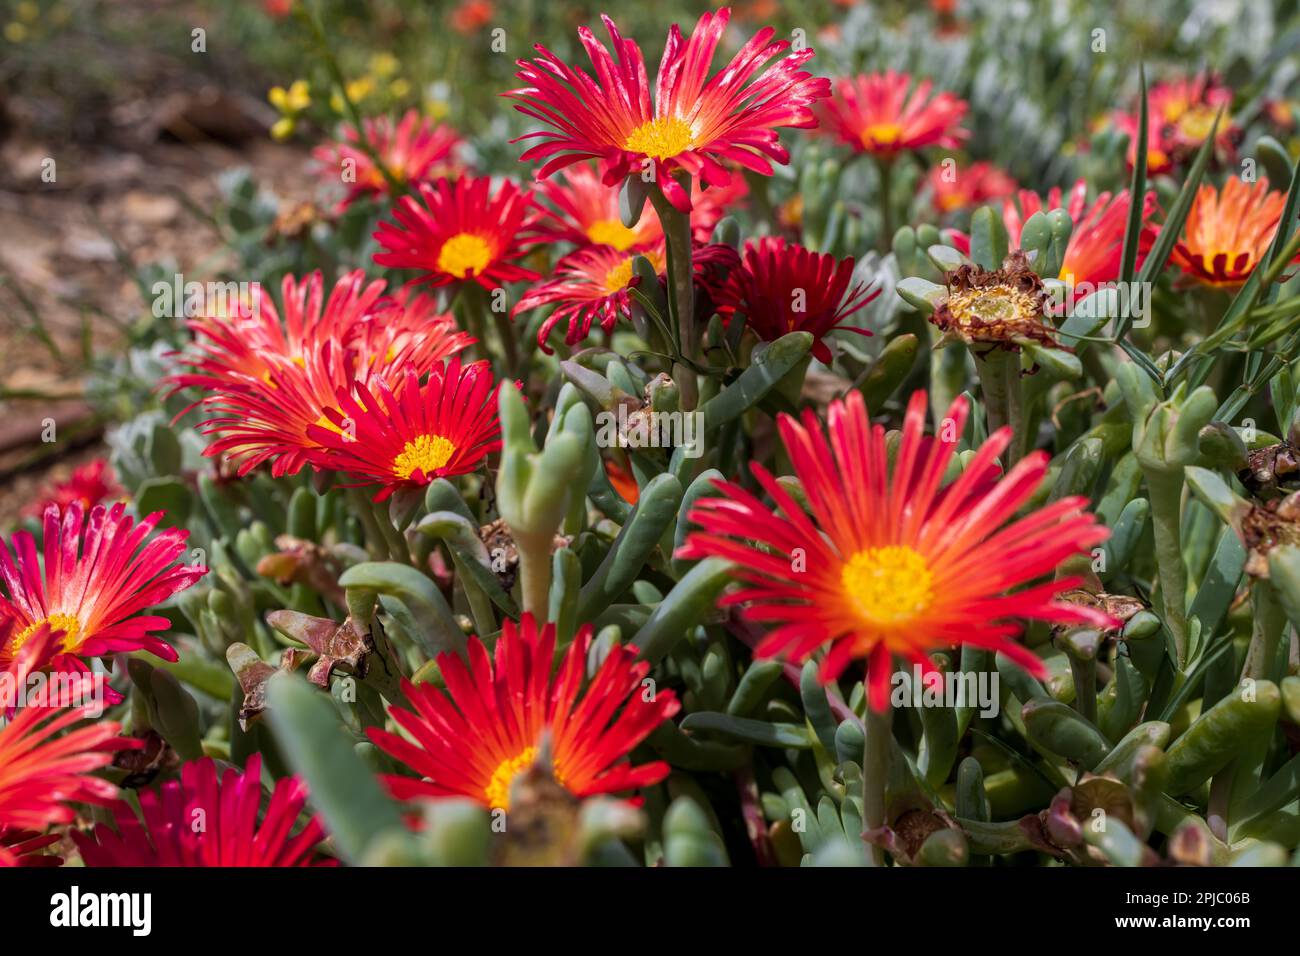 Malephora crocea is a species of flowering plant in the ice plant family known by the common name coppery mesemb and red ice plant. Flora of Israel. Stock Photo